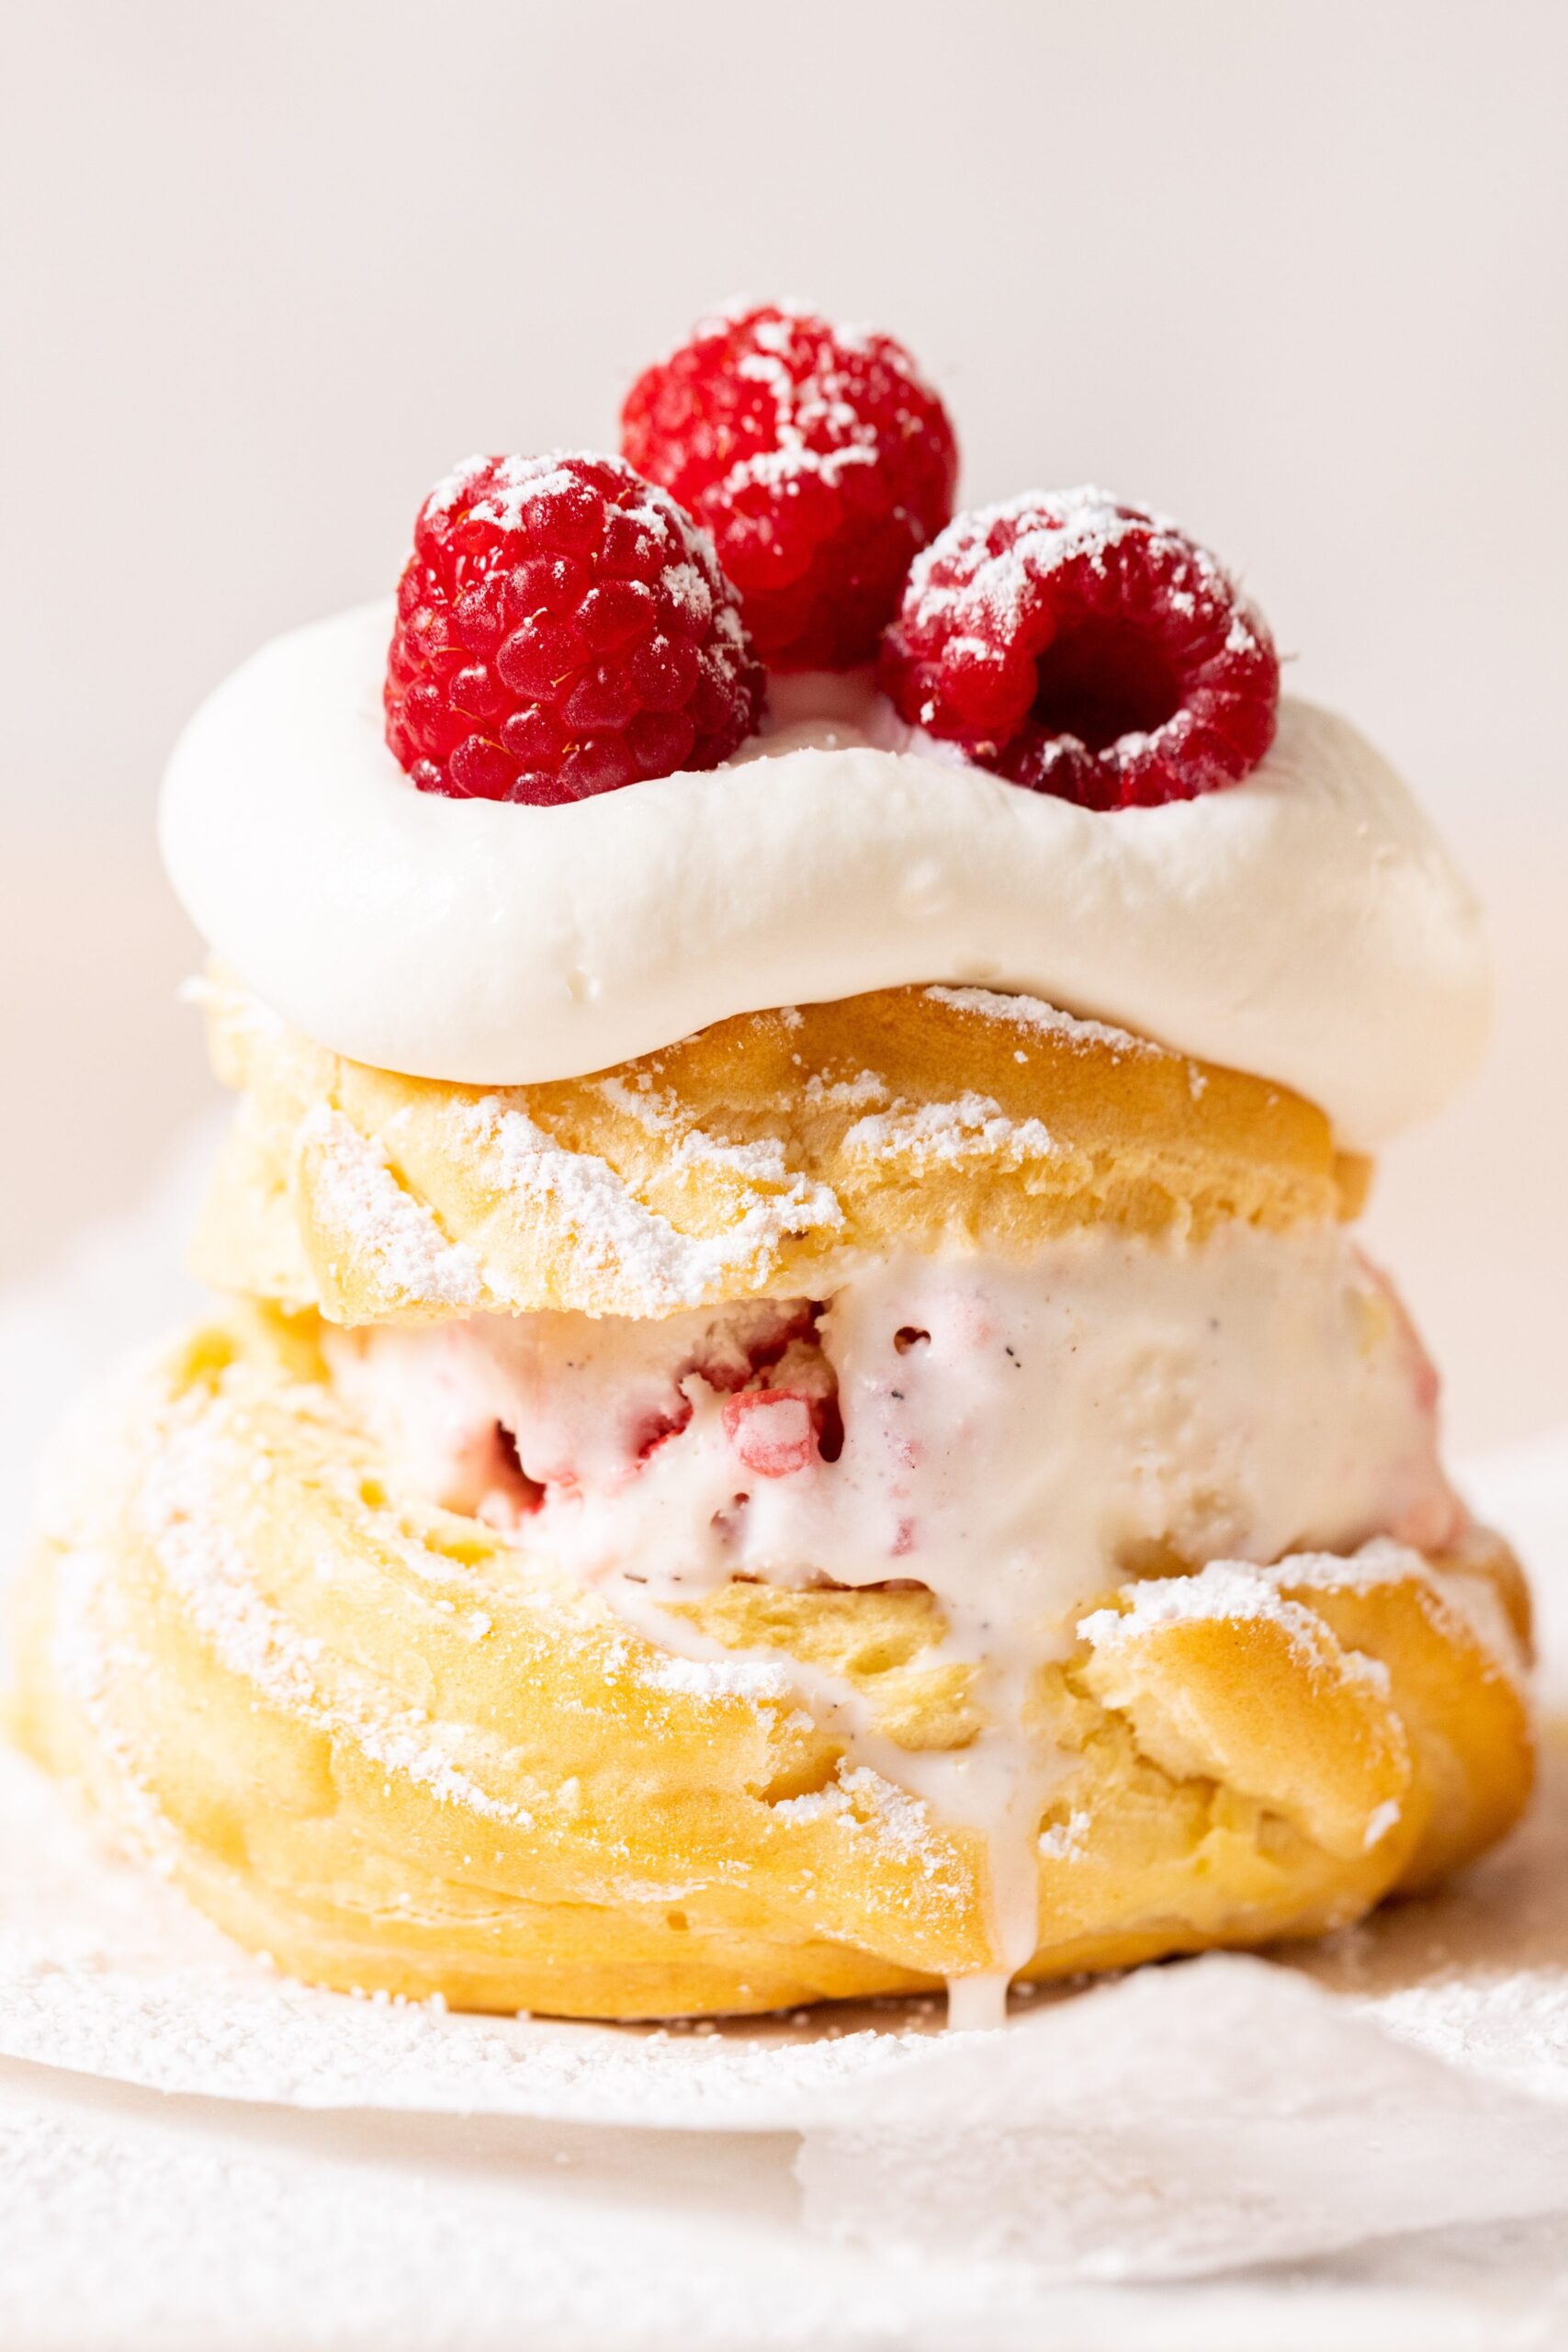 Side view of a windbeutel filled with ice cream, topped with whipped cream and raspberries.